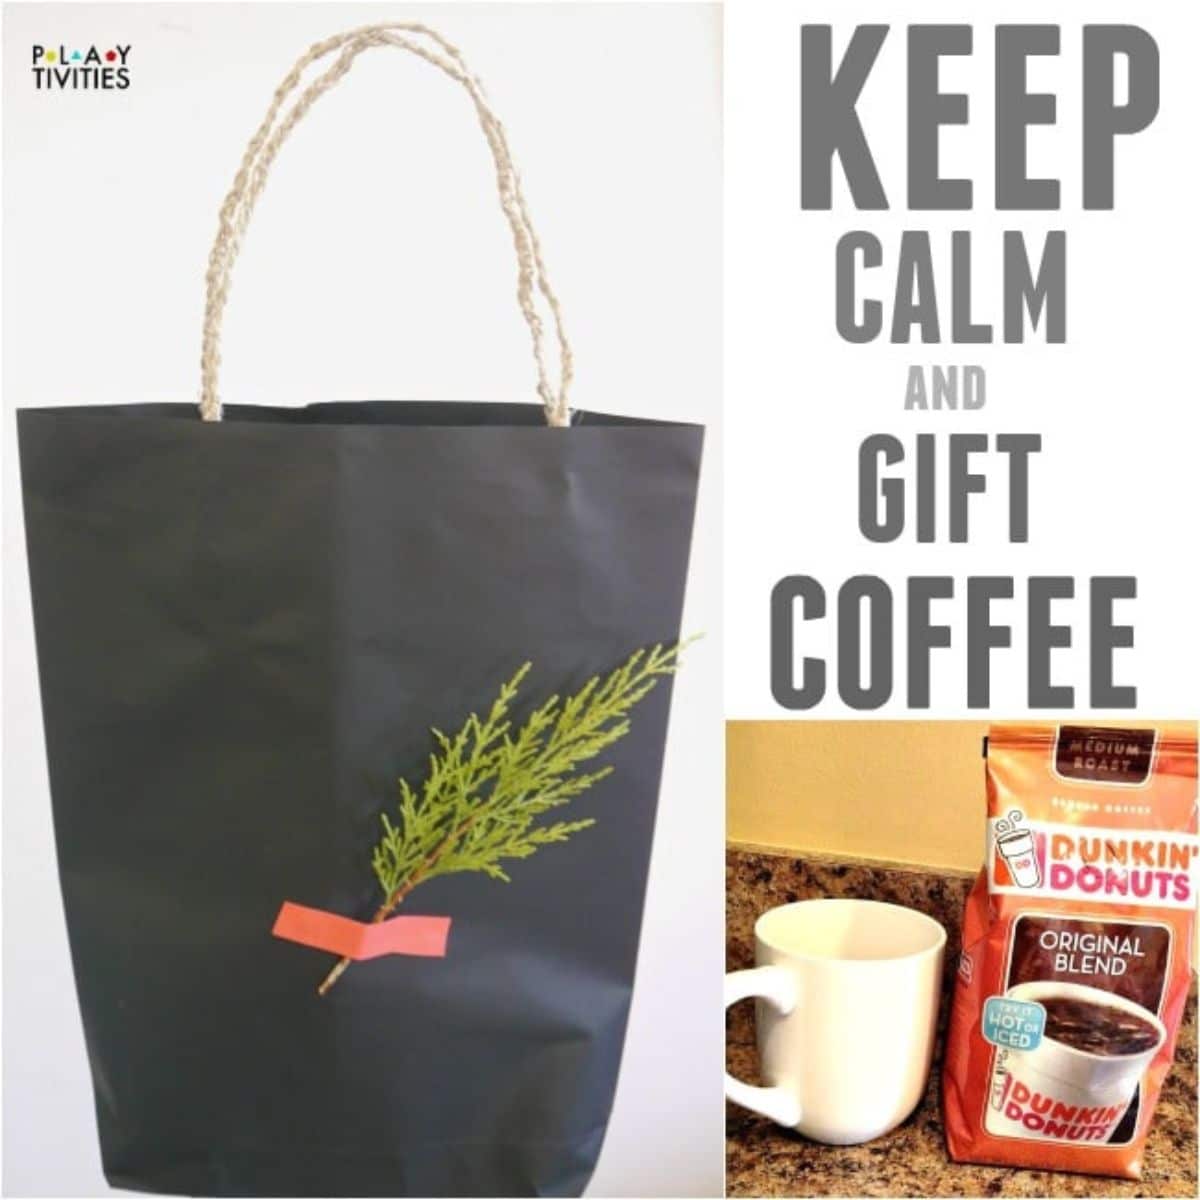 Keep cal and gift coffe poster.